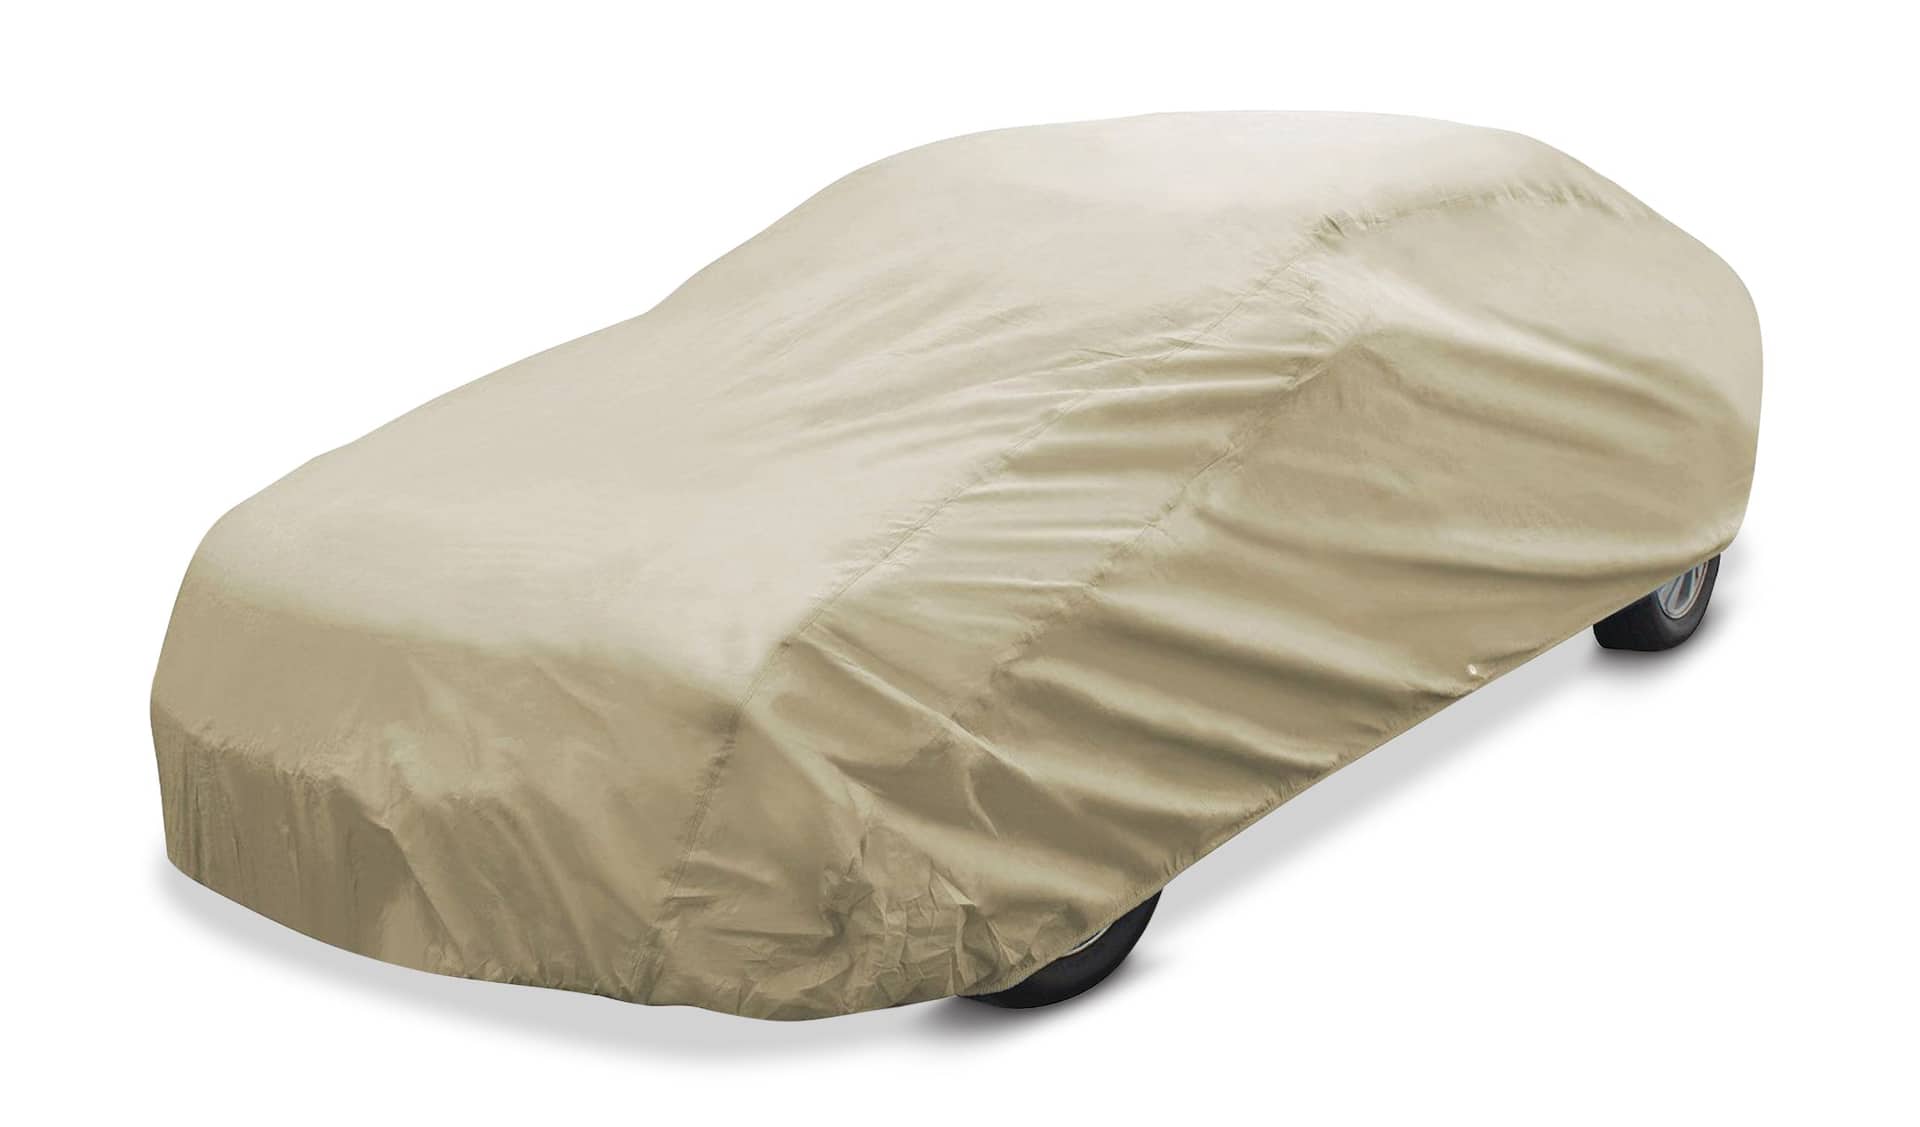 Simoniz 3-Layer Water Resistant Car Cover with UV Protection, Large: Fits  cars 16'8 to 19' (508 to 579 cm) in length